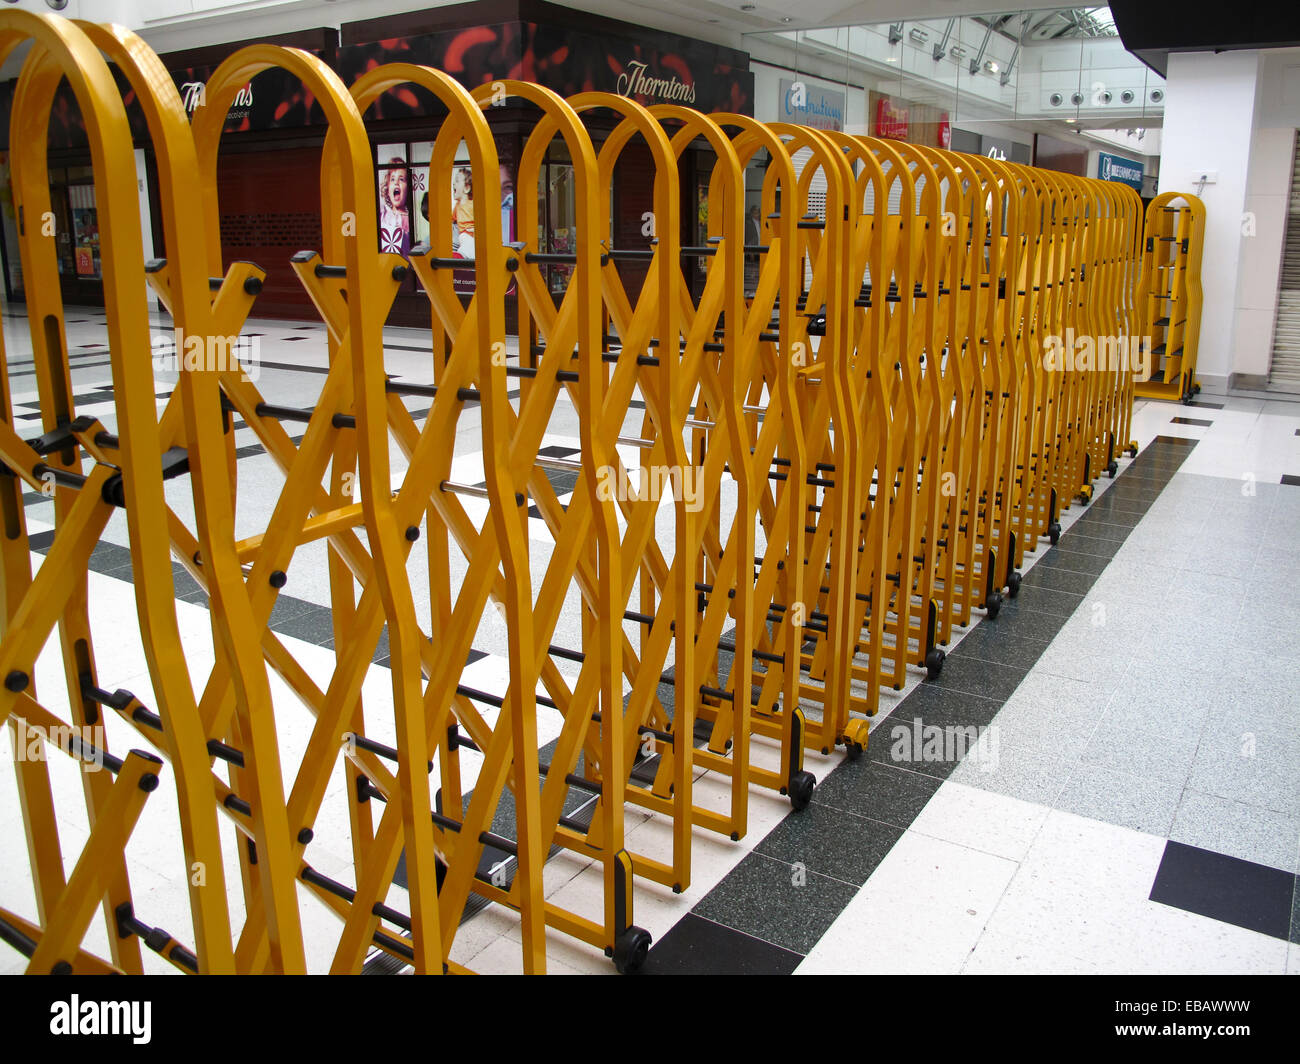 Collapsible security barrier in shopping centre Stock Photo